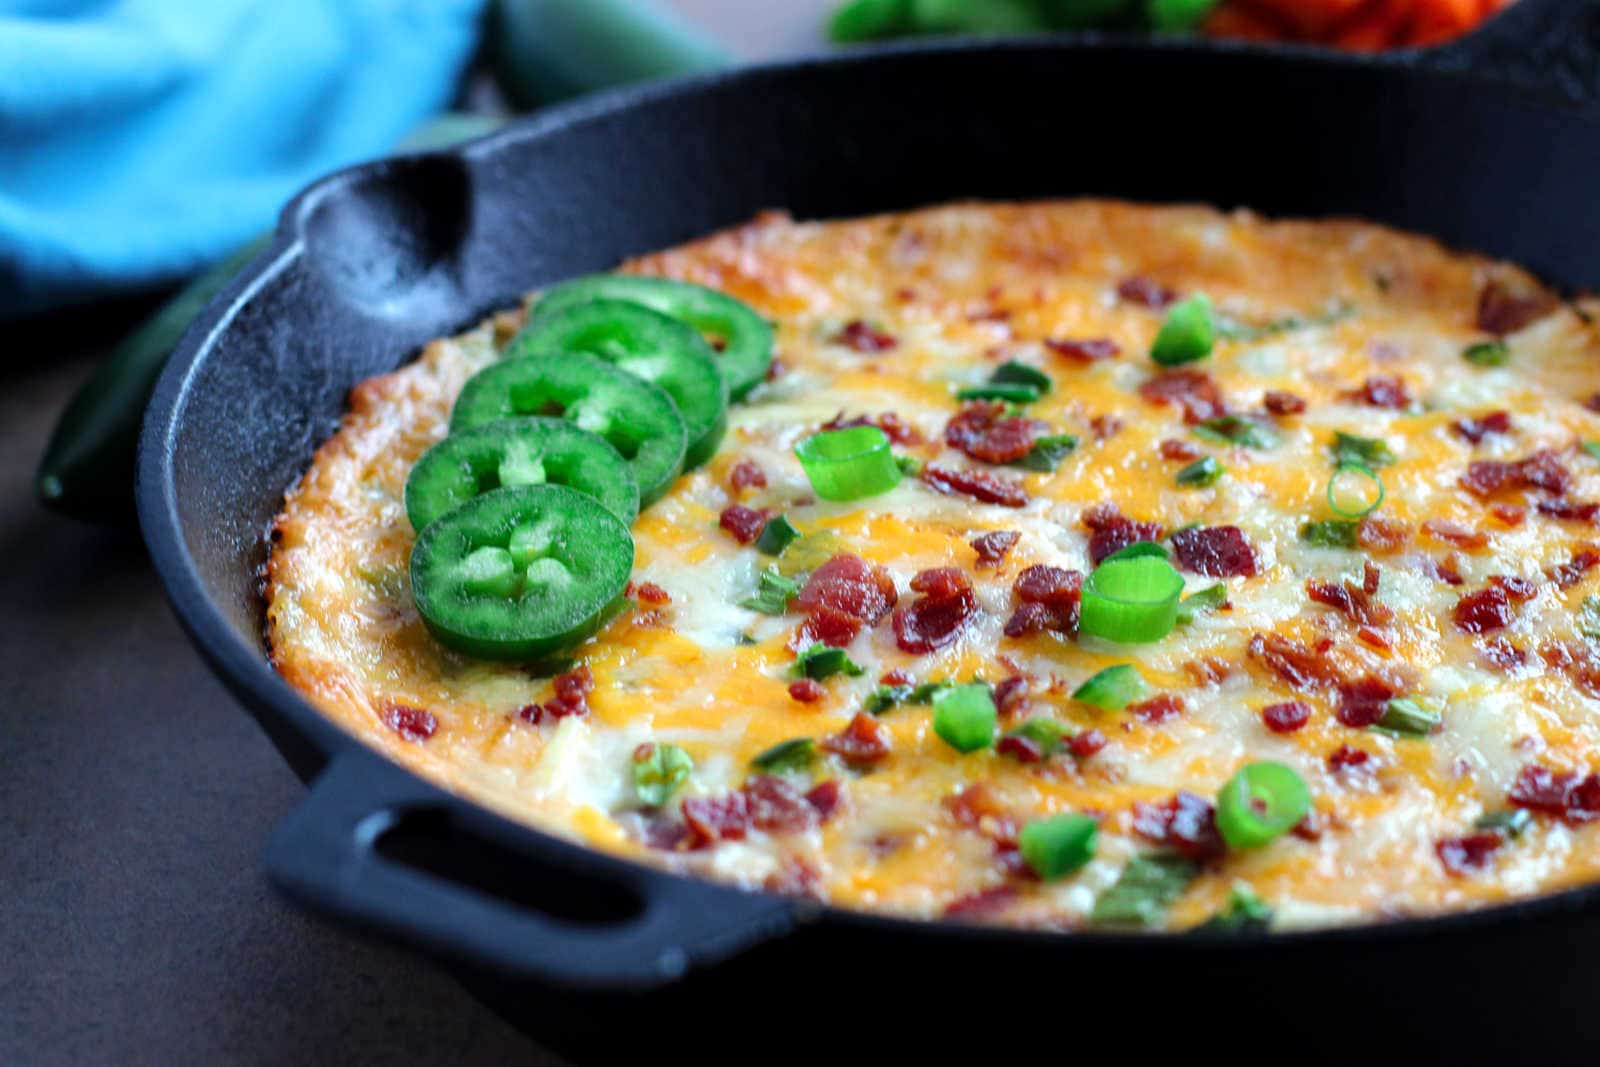 A skillet filled with a baked jalapeno popper dip.